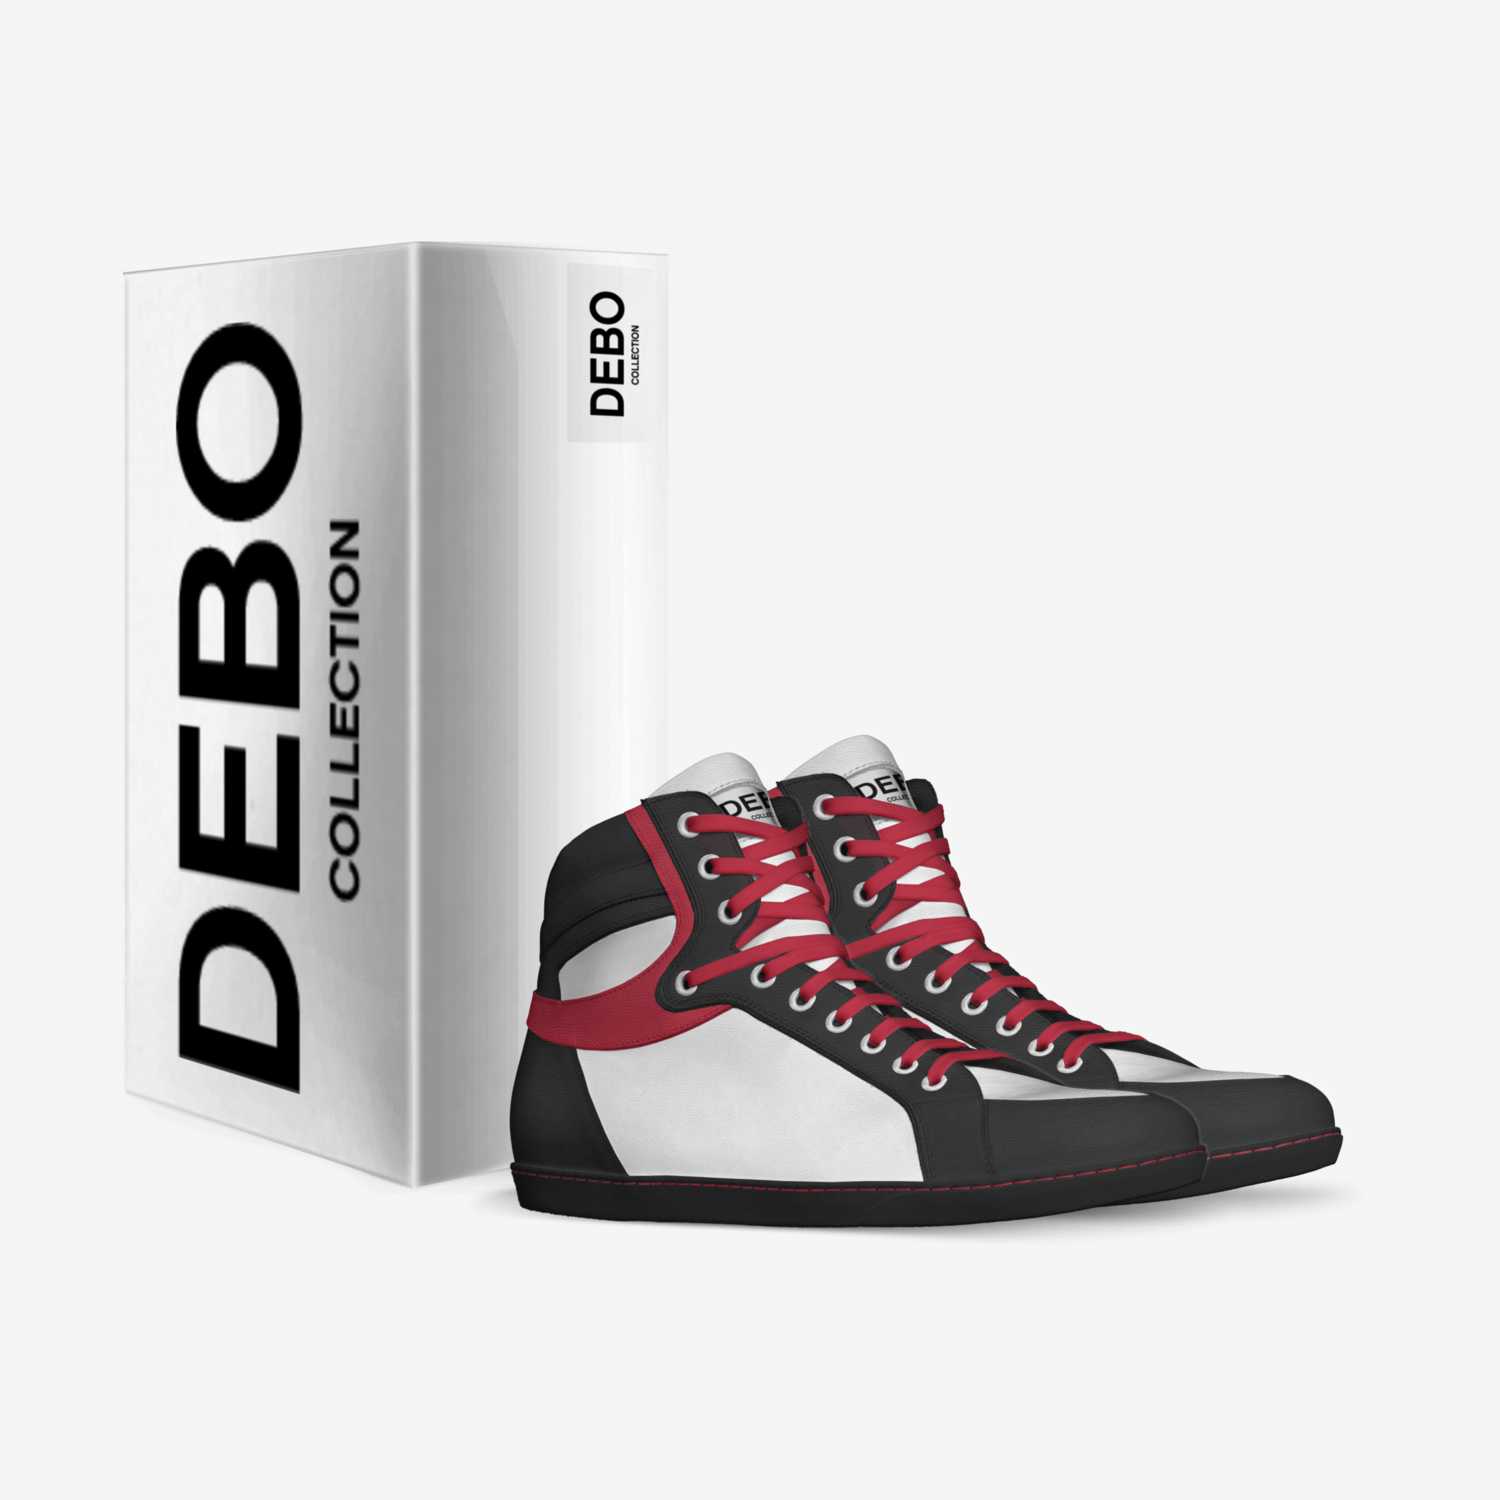 DEBO LifeStyle custom made in Italy shoes by Debo Mathis | Box view